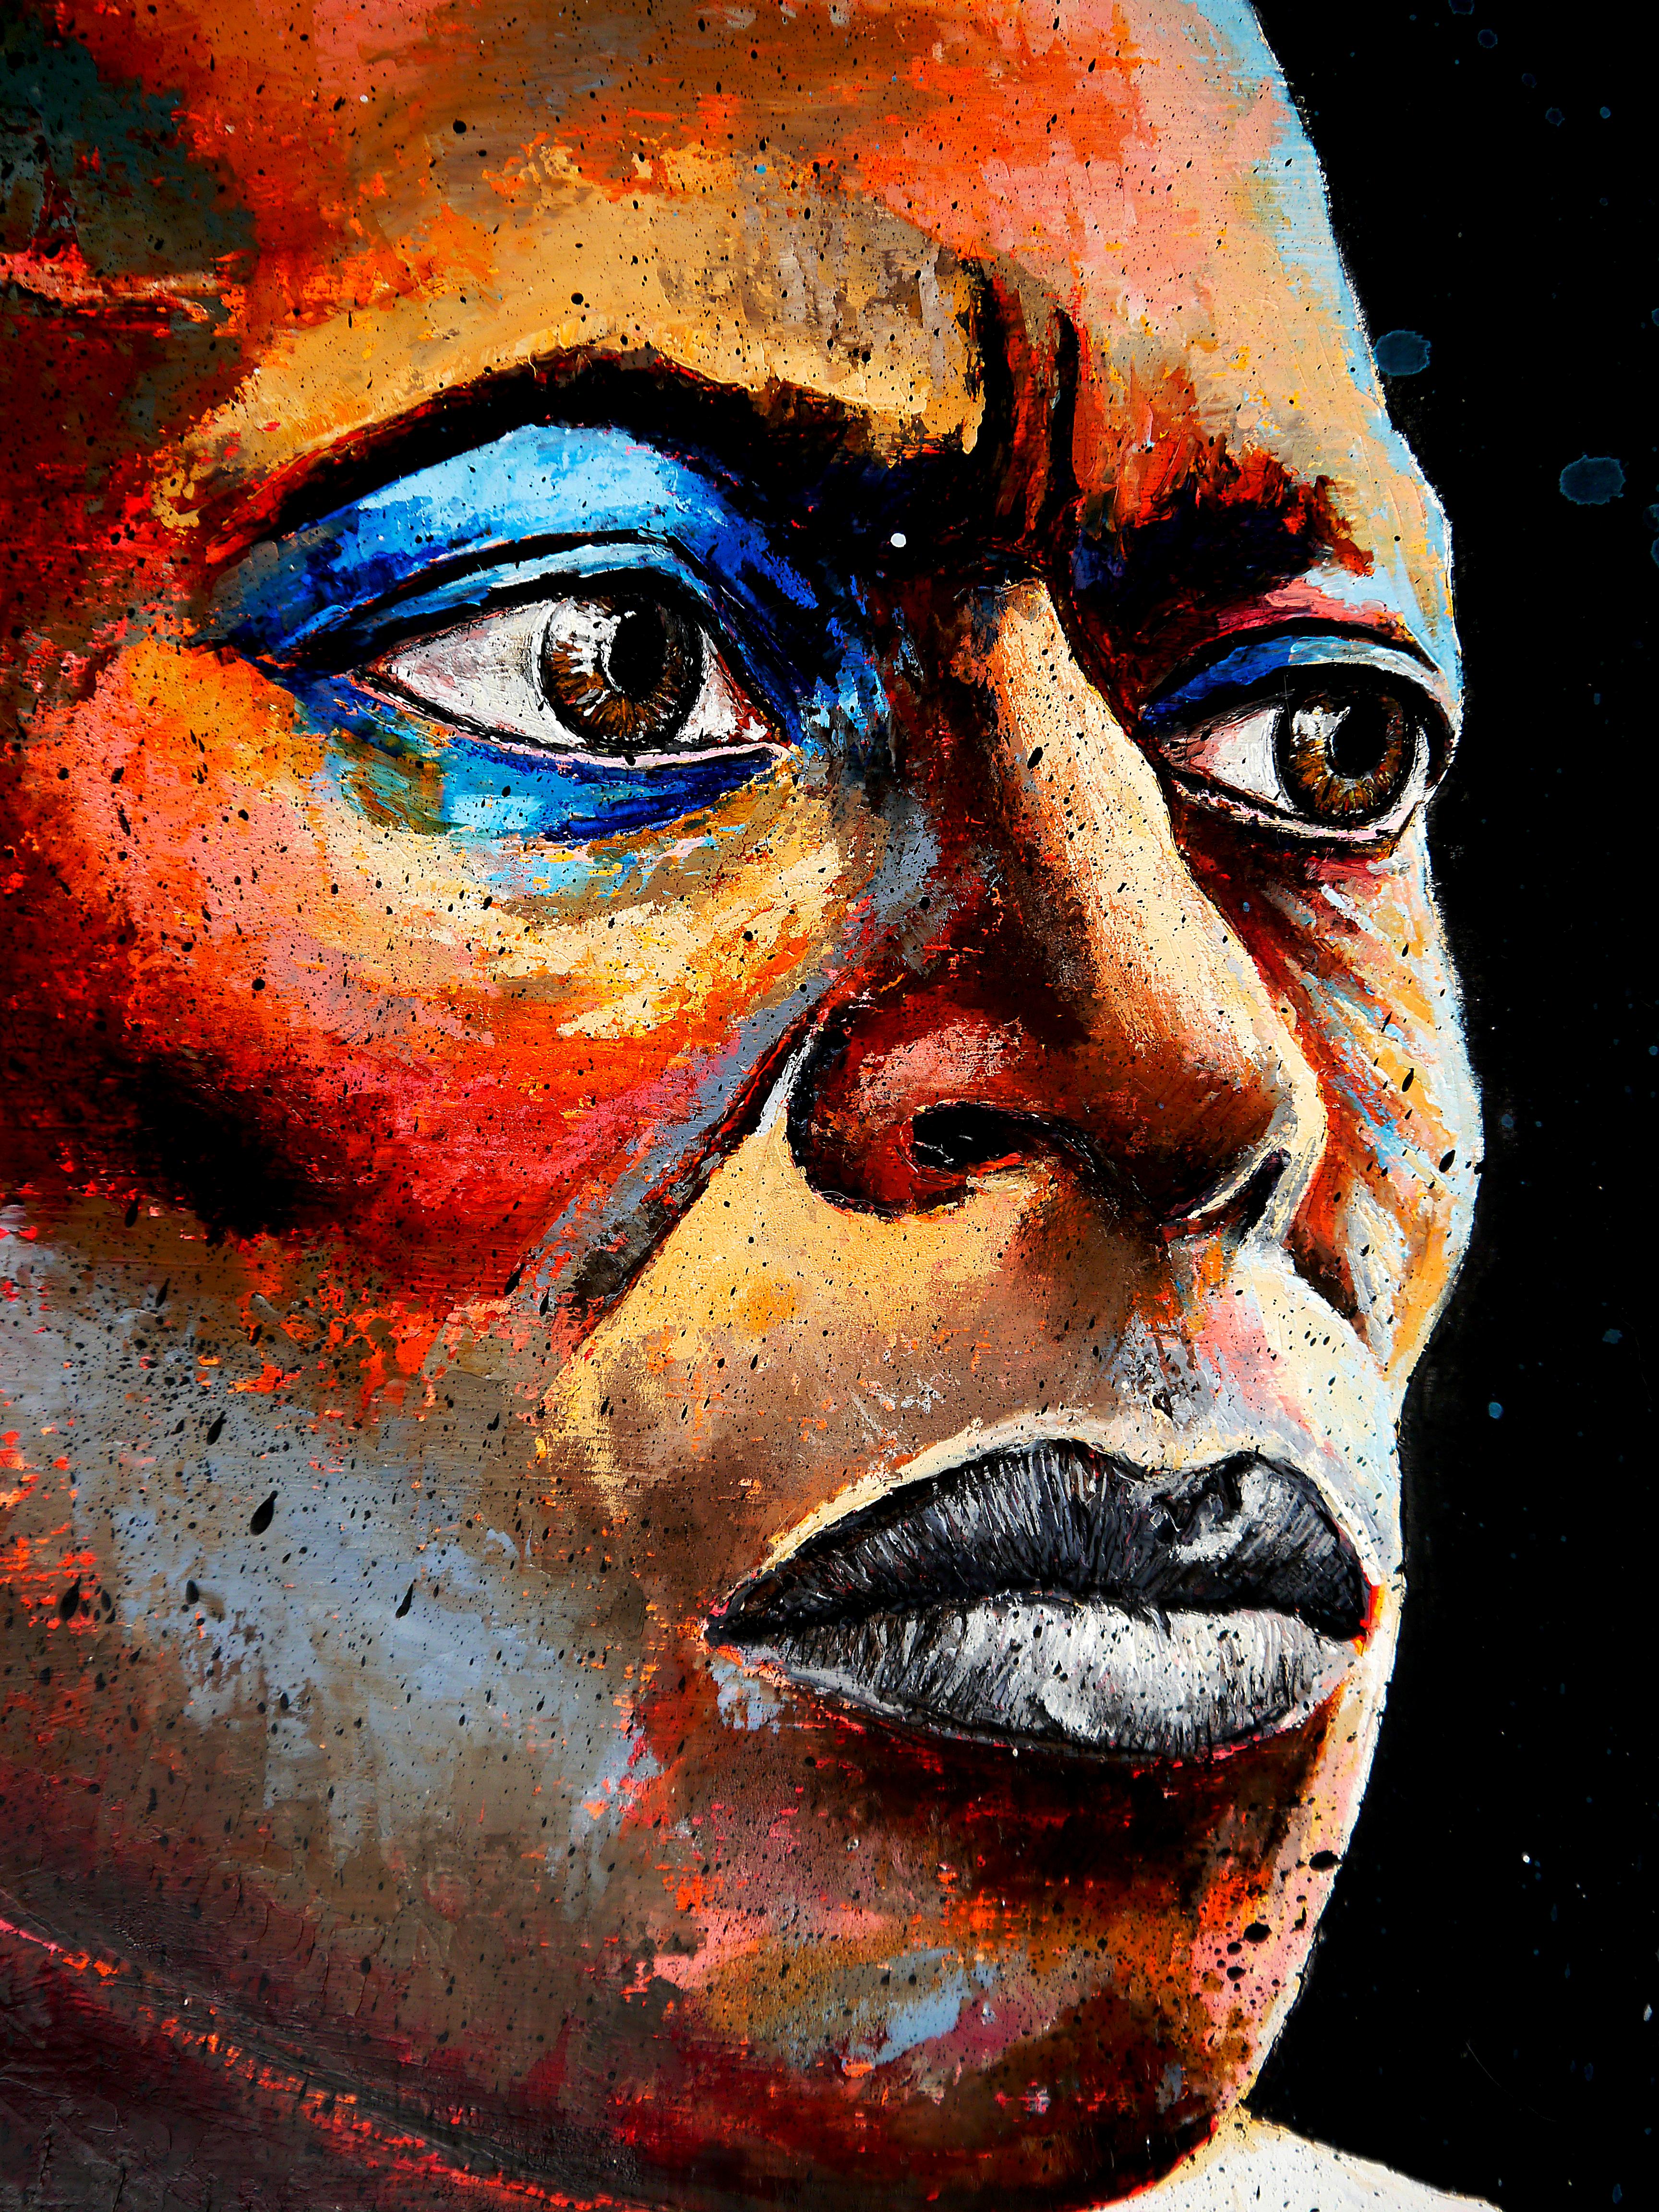 Portrait Miles Davis

Miles Davis icon portrait.

Technique: Acrylics, oil painting, China ink on canvas 73x60cm /28,7x23,6in

》》R E A D Y -- T O -- H A N G《《

❶ → Original signed work. Certificate of authenticity included.

❷ → Protection for